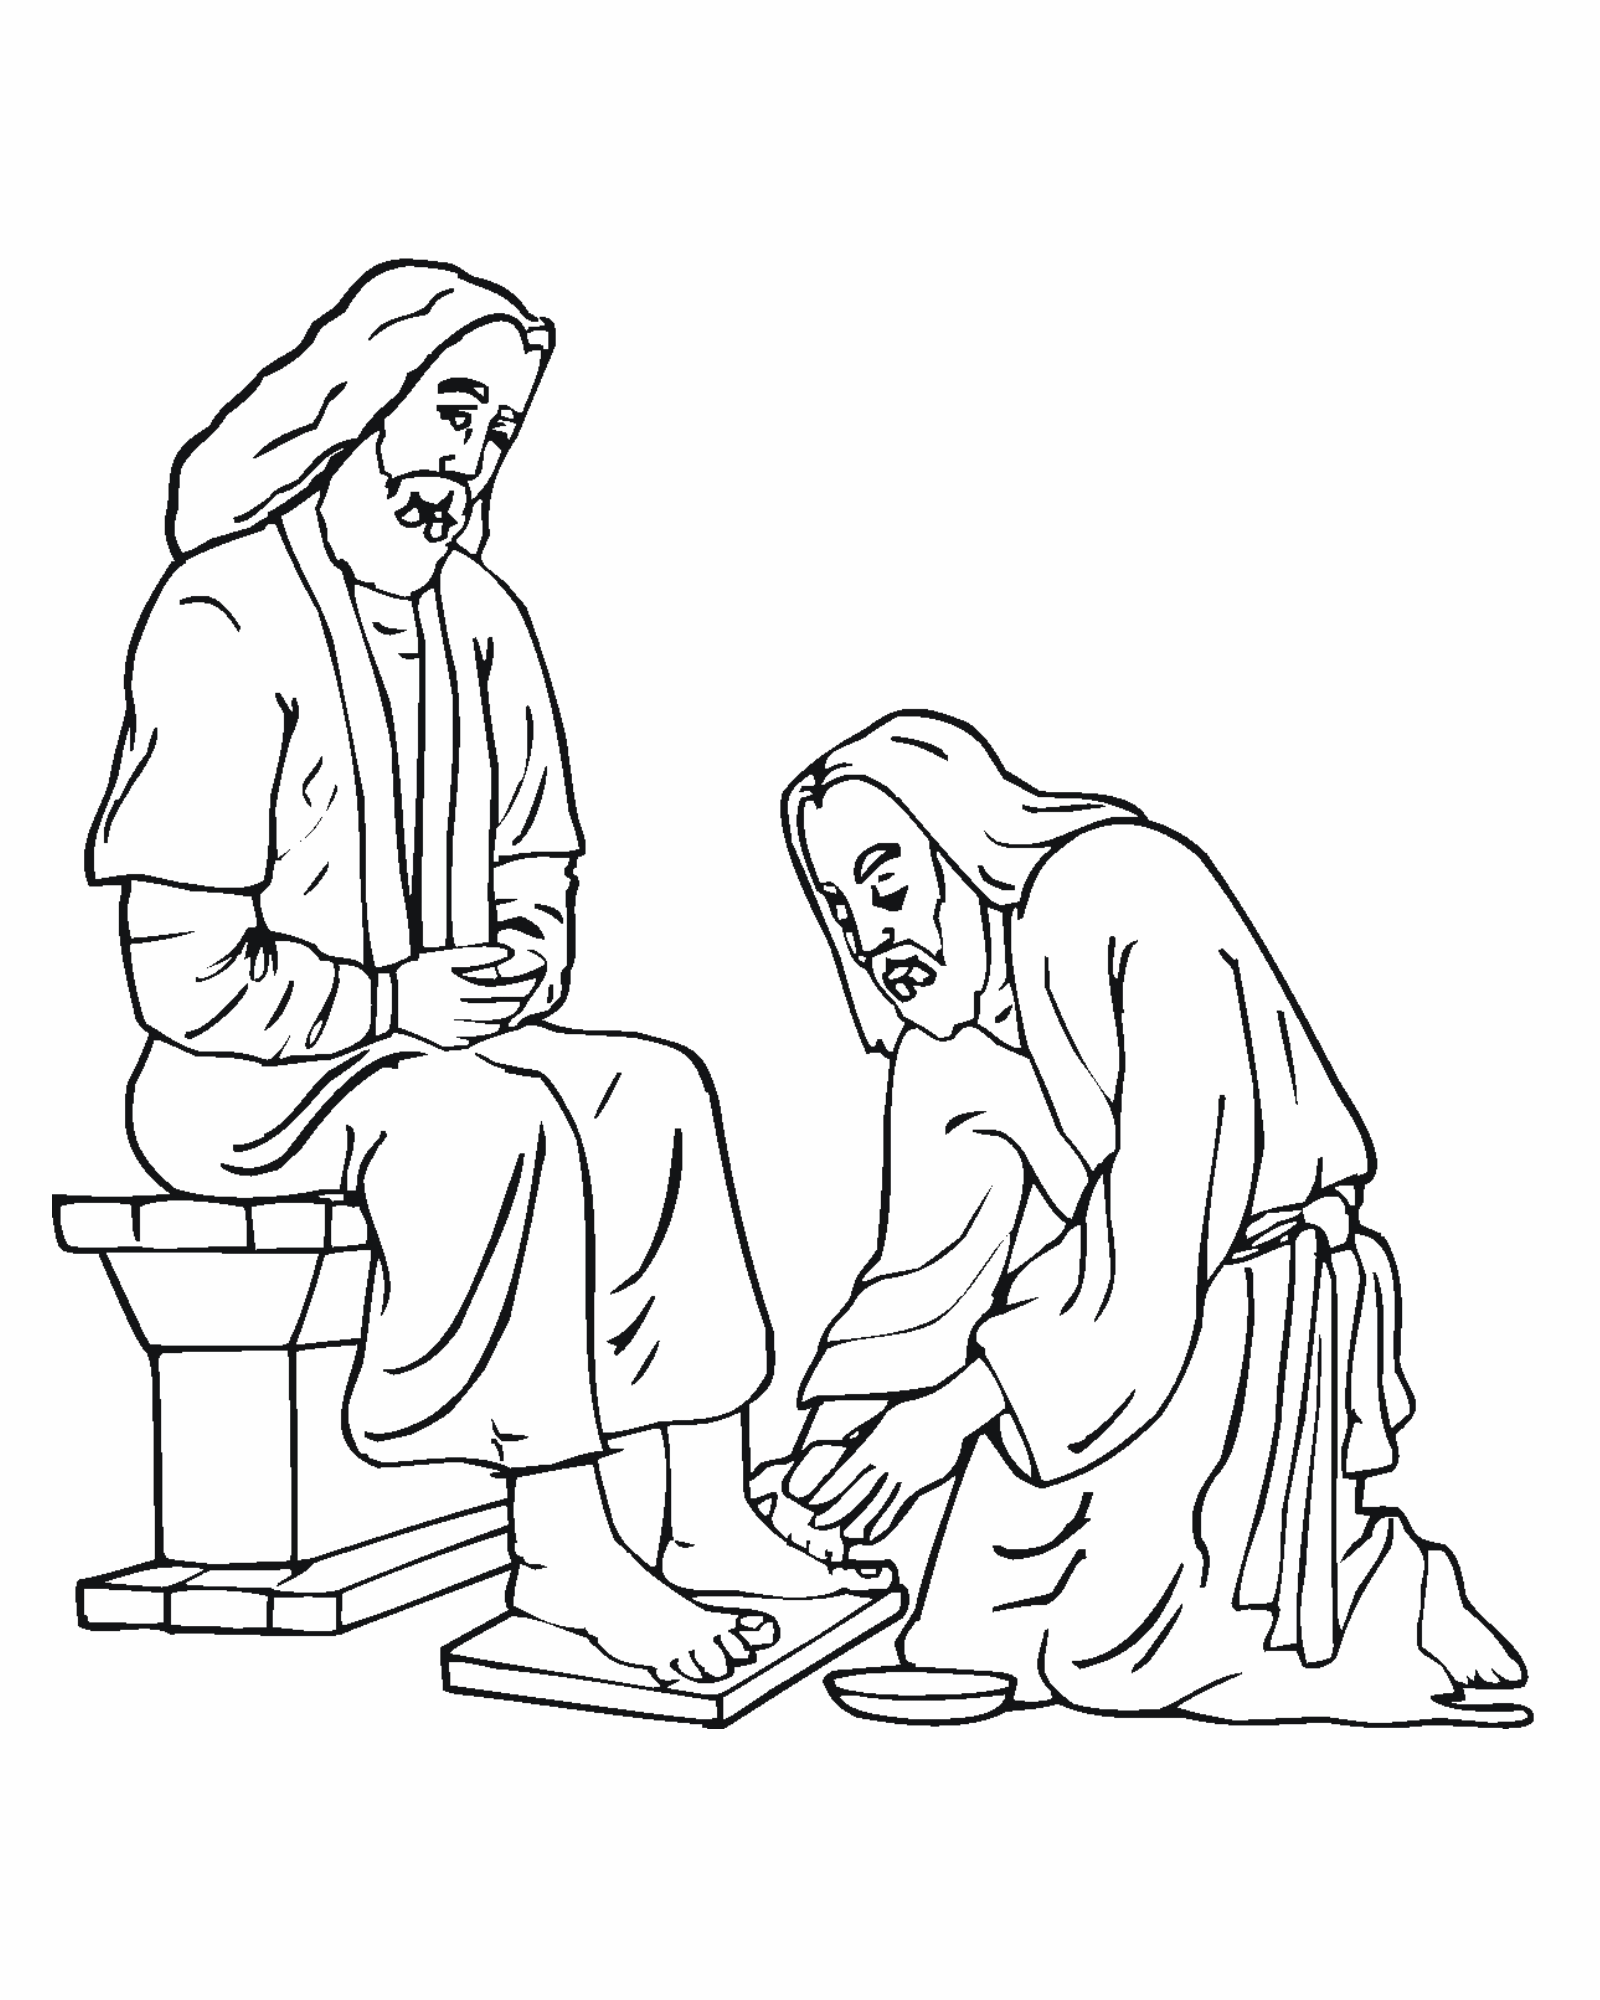 Jesus Washes Disciples Feet Coloring Page - Coloring Pages for ...